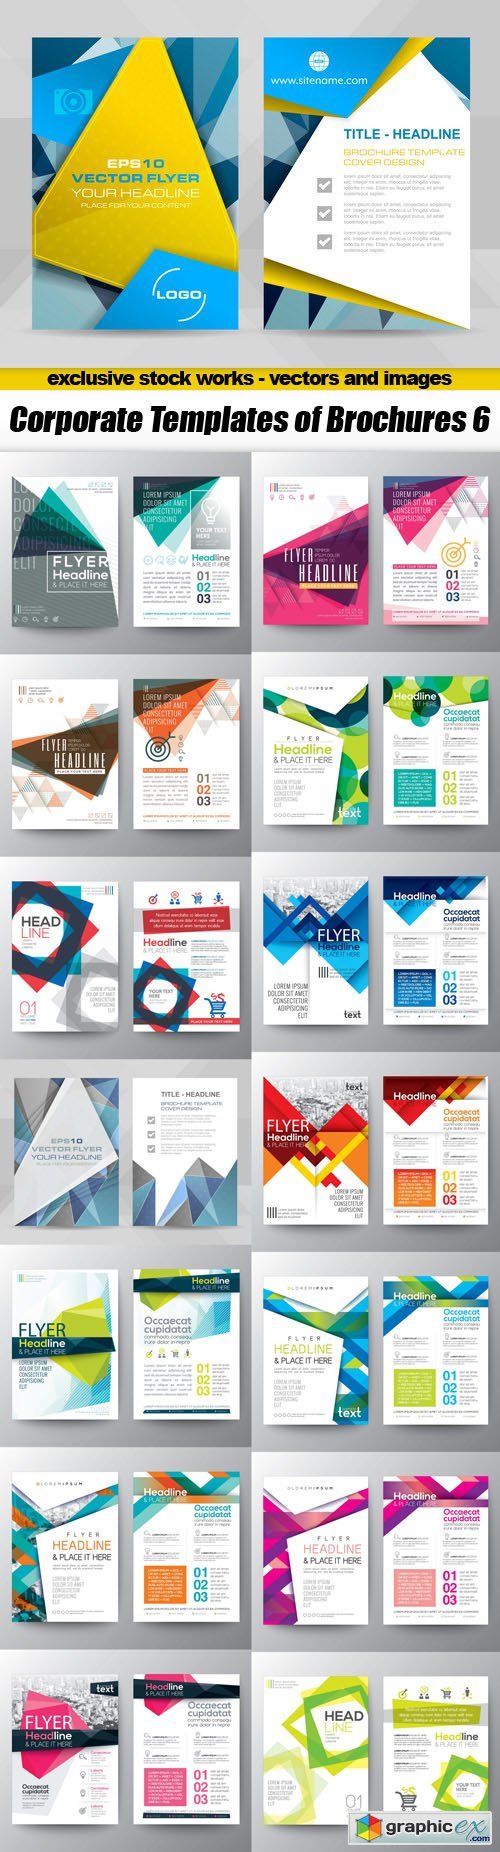 Corporate Templates of Brochures 6 - 15xEPS